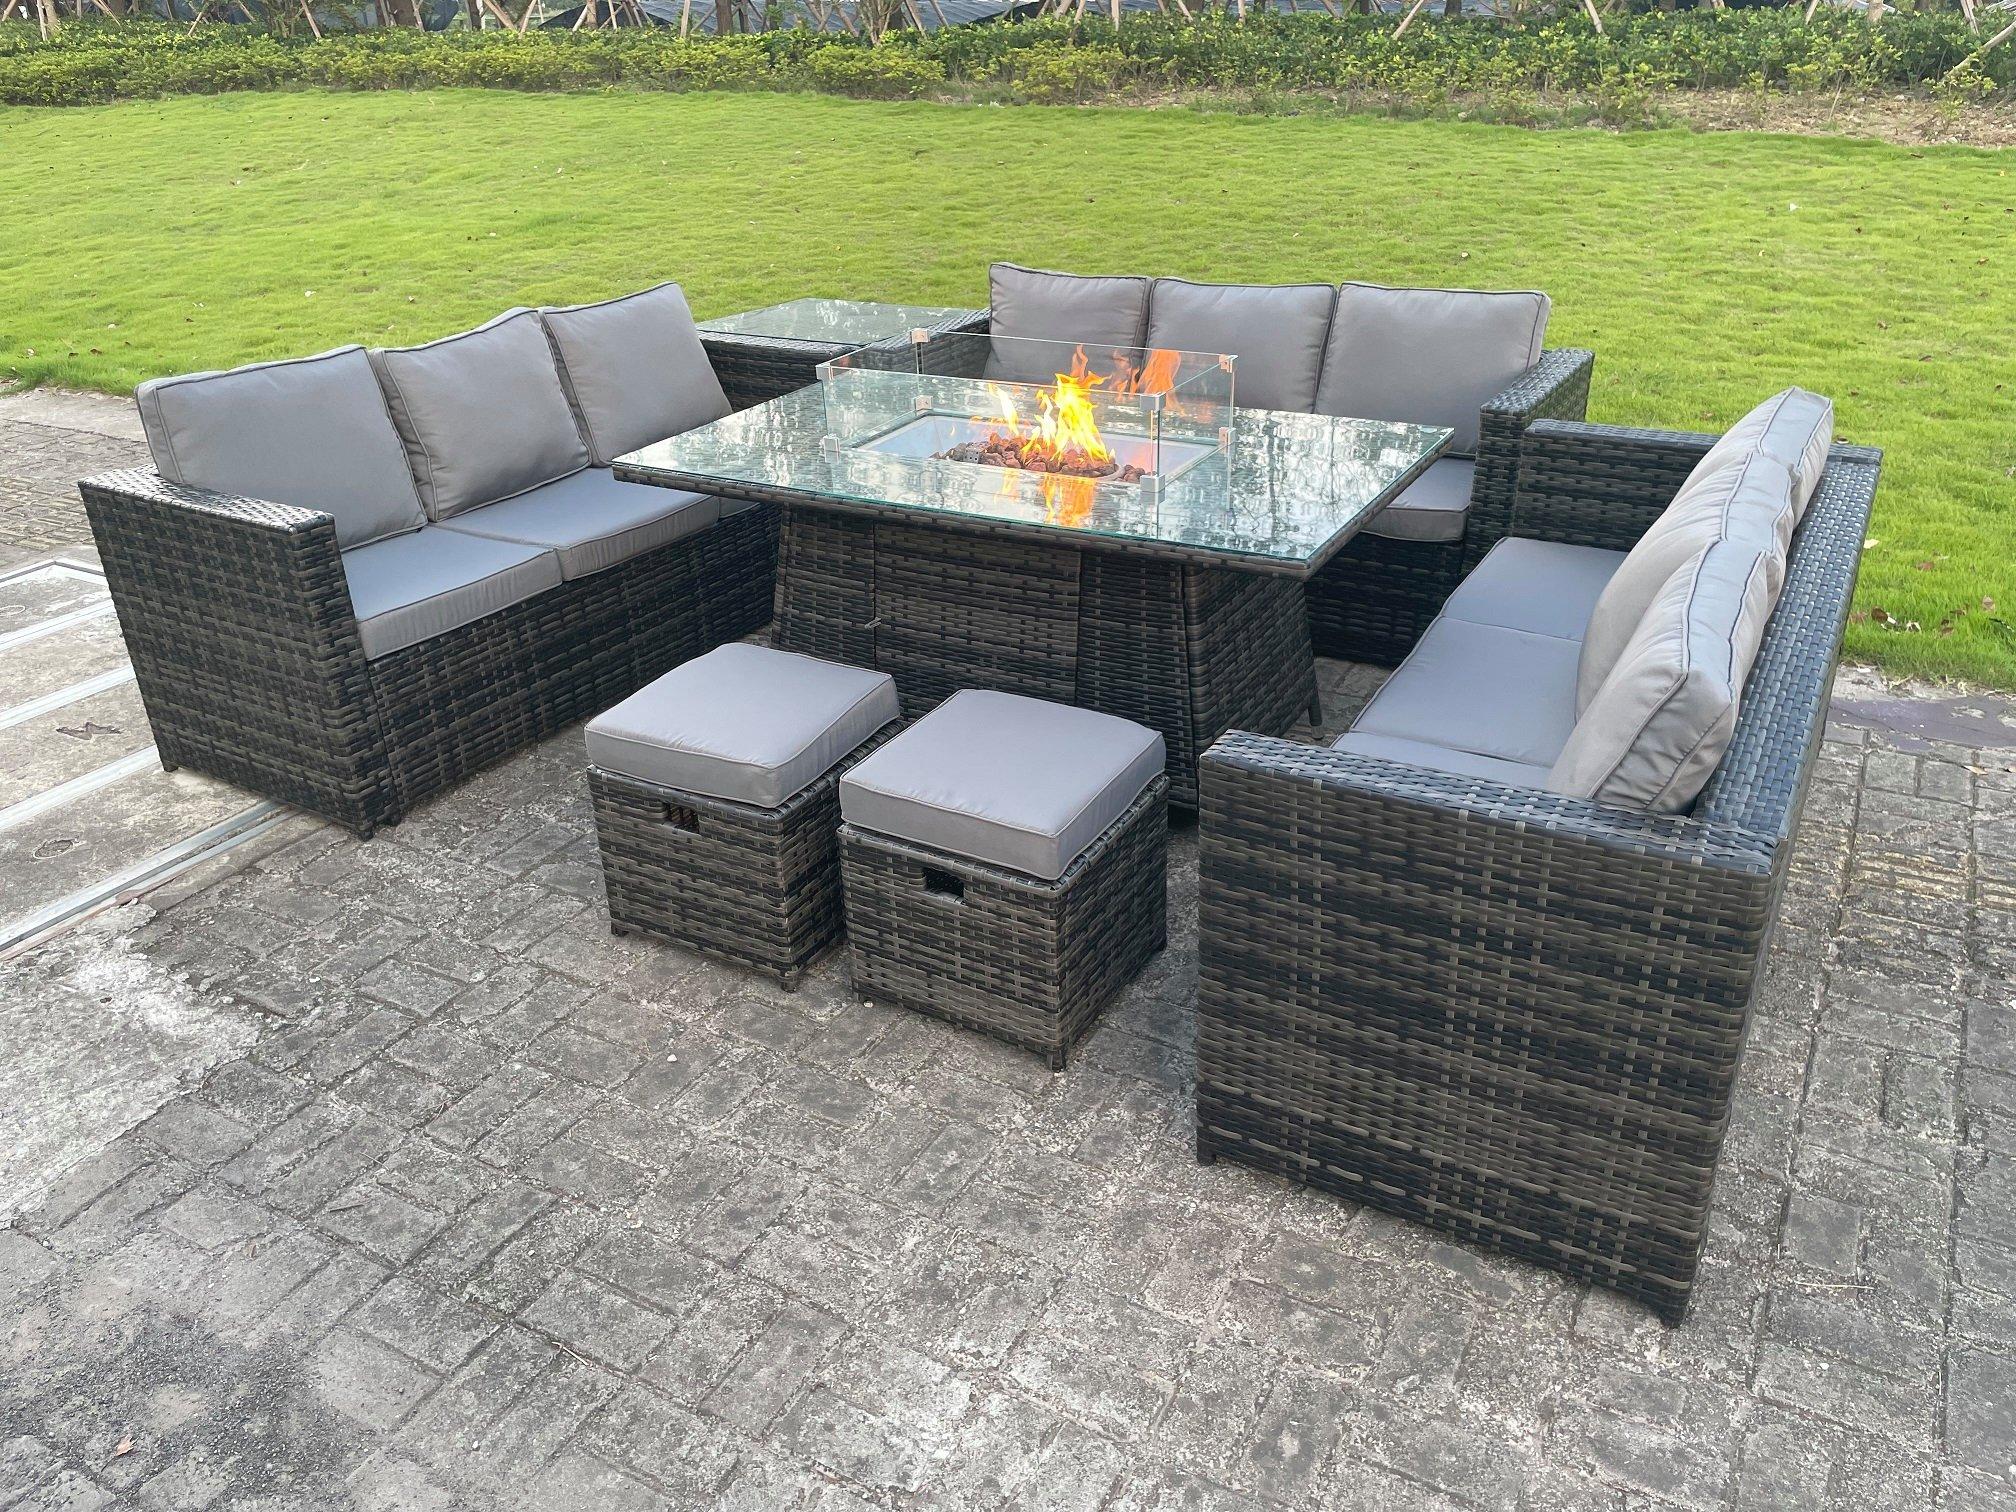 Outdoor Rattan Garden Furniture Gas Fire Pit Dining Table Gas Heater Sets Side Table Small Footstool